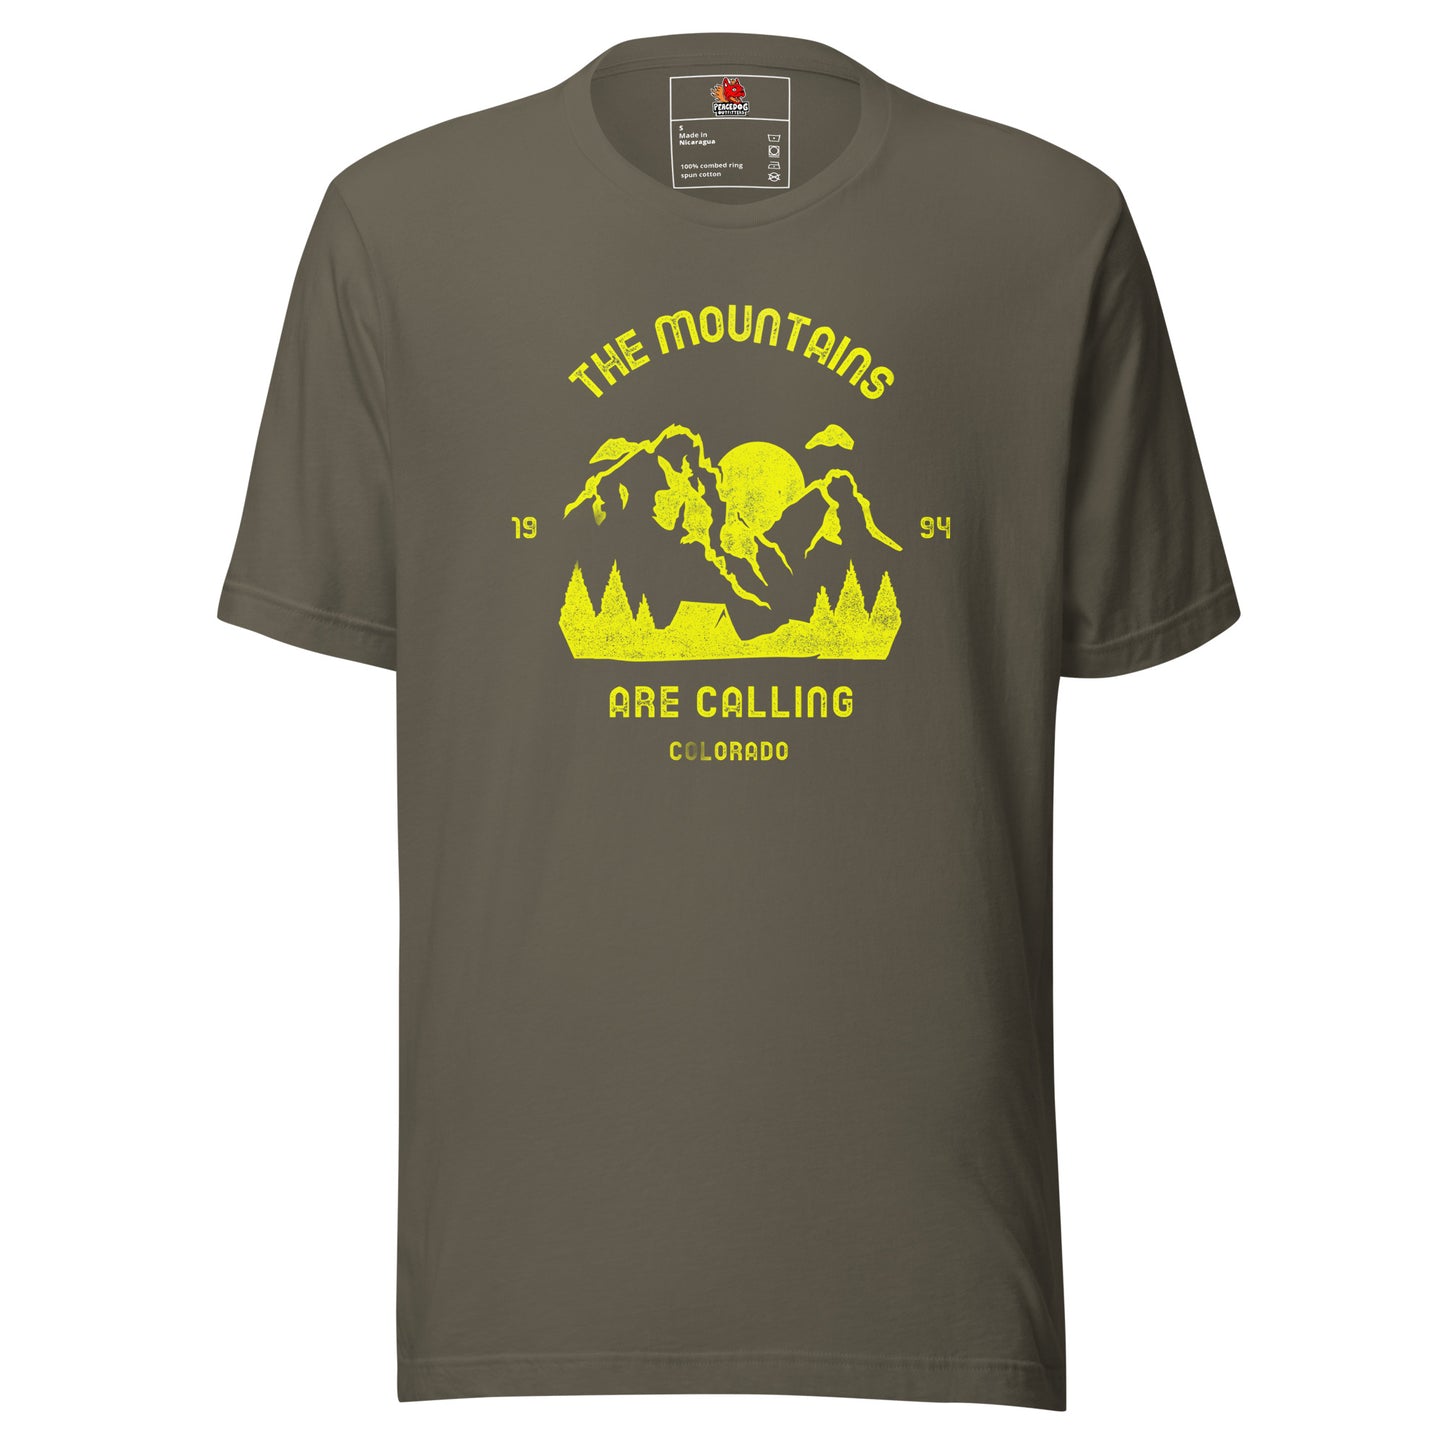 The Mountains are Calling - COLORADO T-shirt